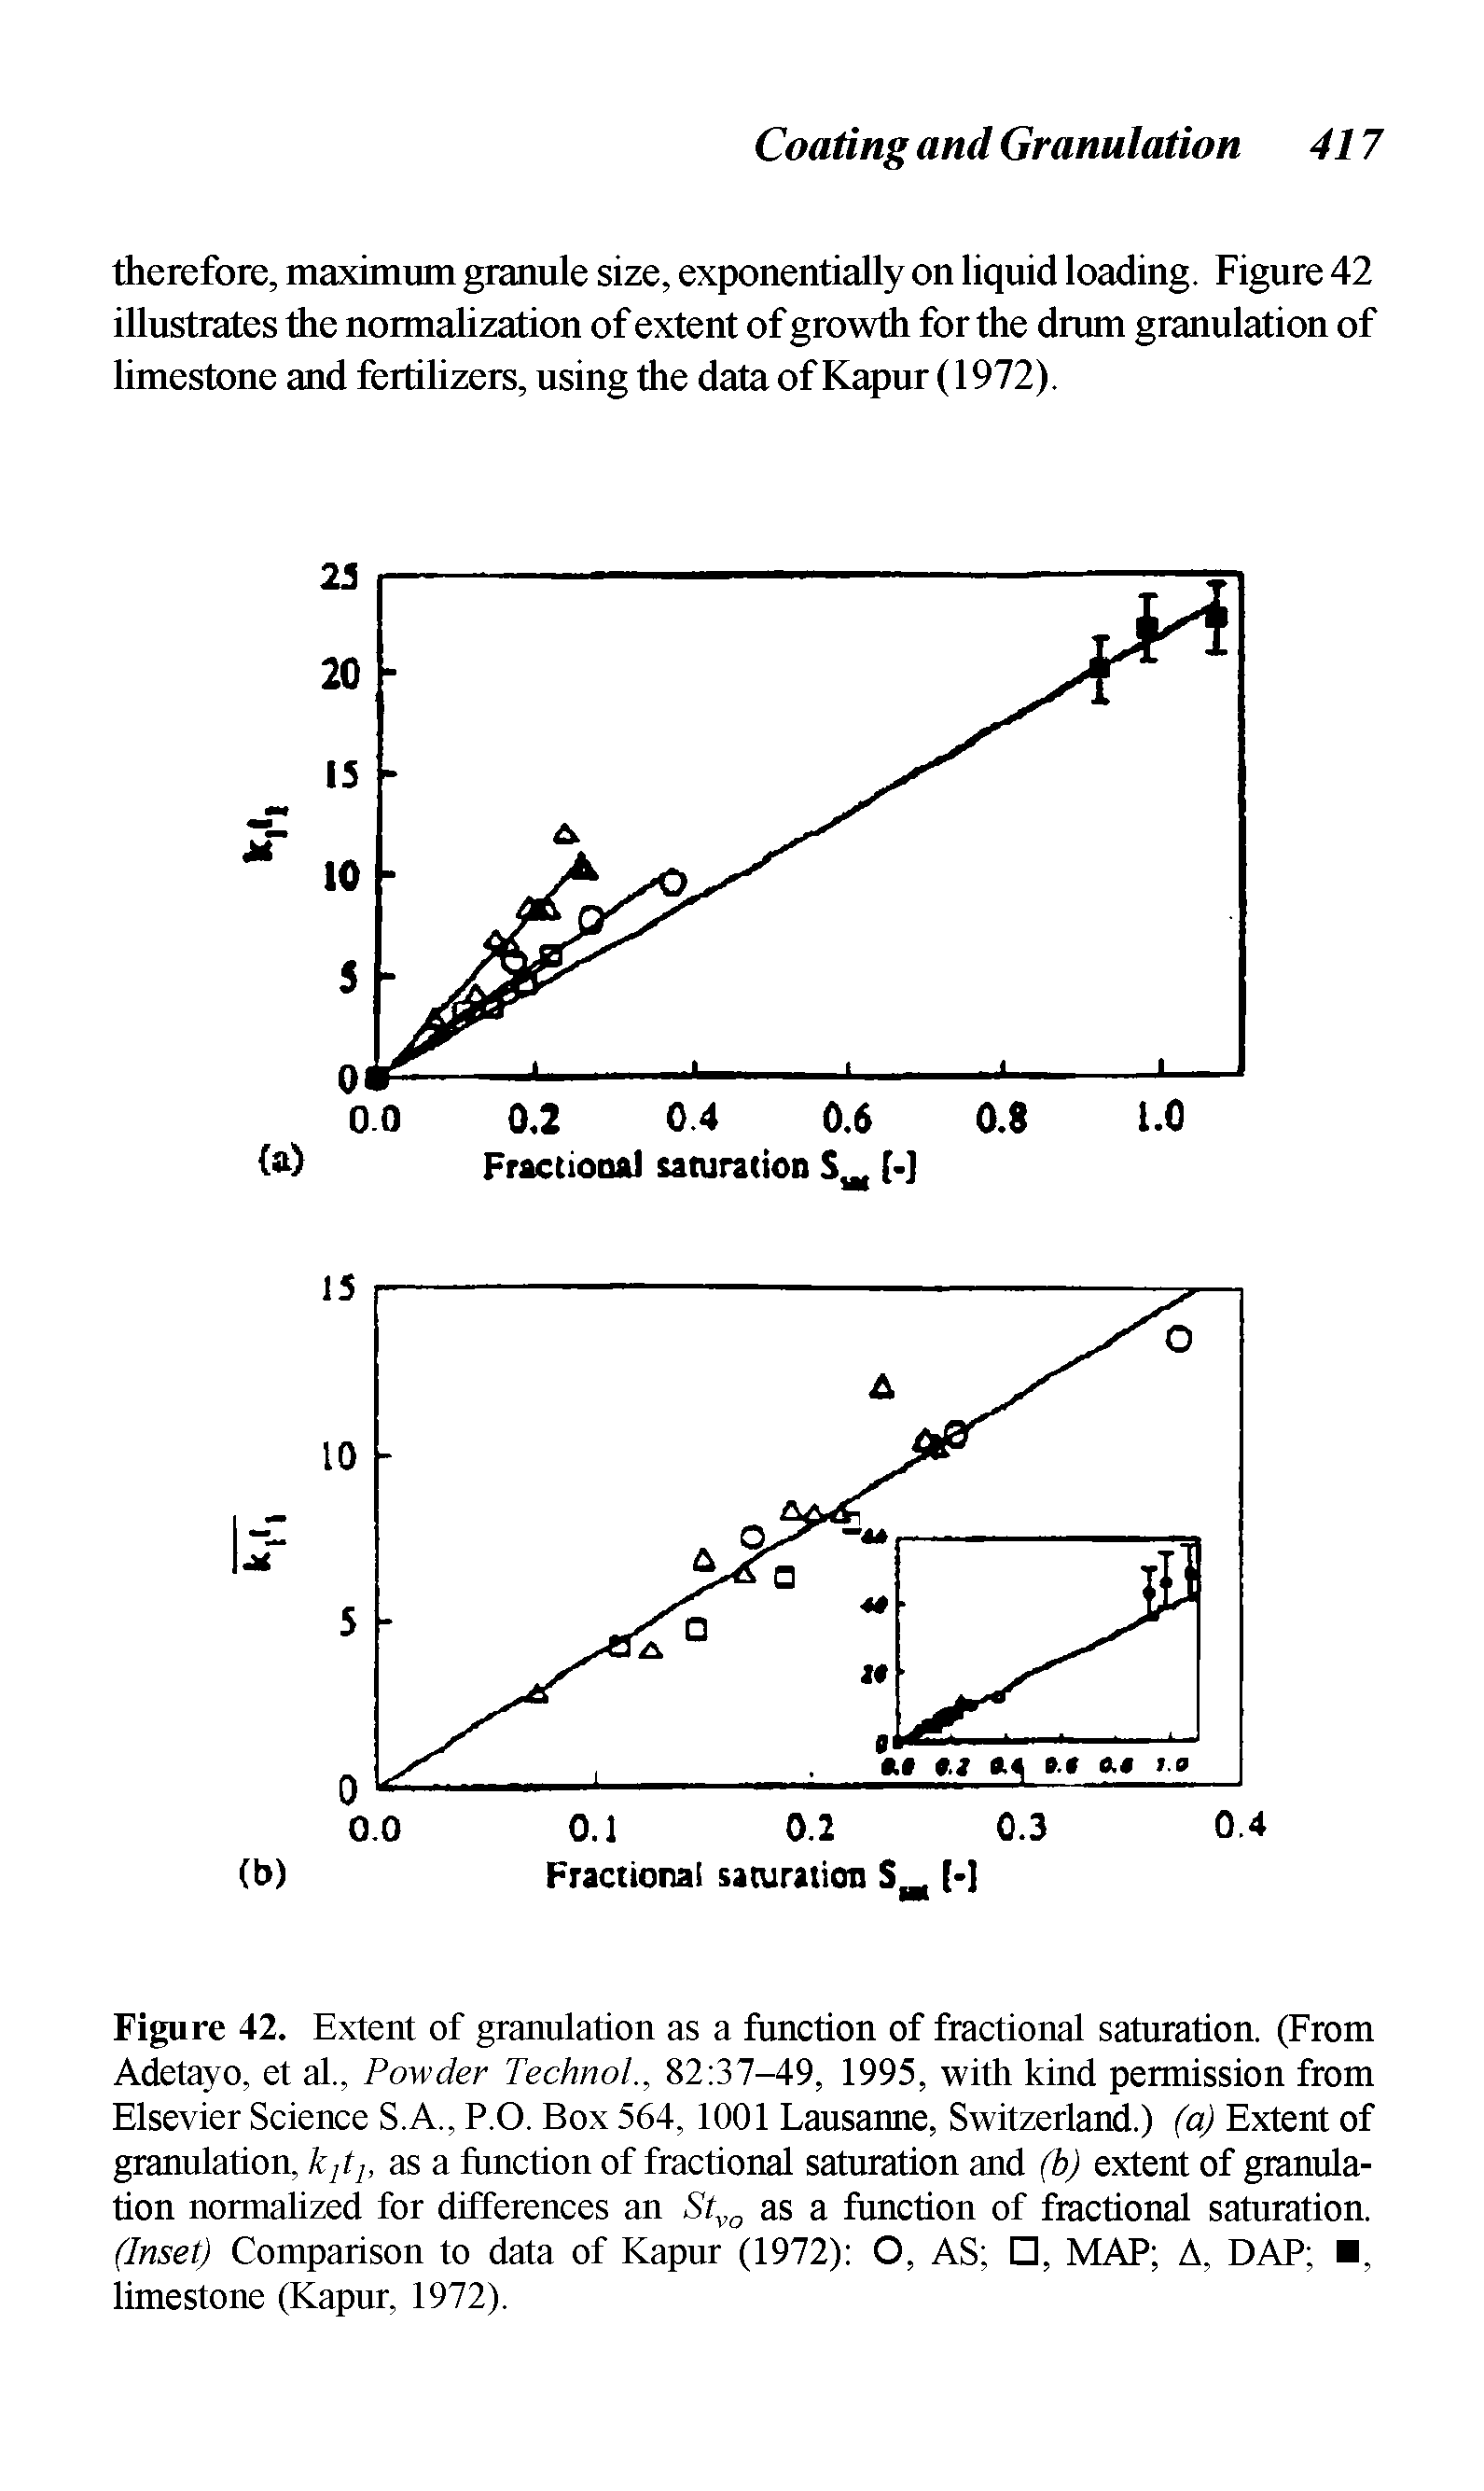 Figure 42. Extent of granulation as a function of fractional saturation. (From Adetayo, et al., Powder Technol., 82 37-49, 1995, with kind permission from Elsevier Science S.A., P.O. Box 564, 1001 Lausanne, Switzerland.) (a) Extent of granulation, k,ih as a function of fractional saturation and (b) extent of granulation normalized for differences an Stvo as a function of fractional saturation. (Inset) Comparison to data of Kapur (1972) O, AS , MAP A, DAP , limestone (Kapur, 1972).